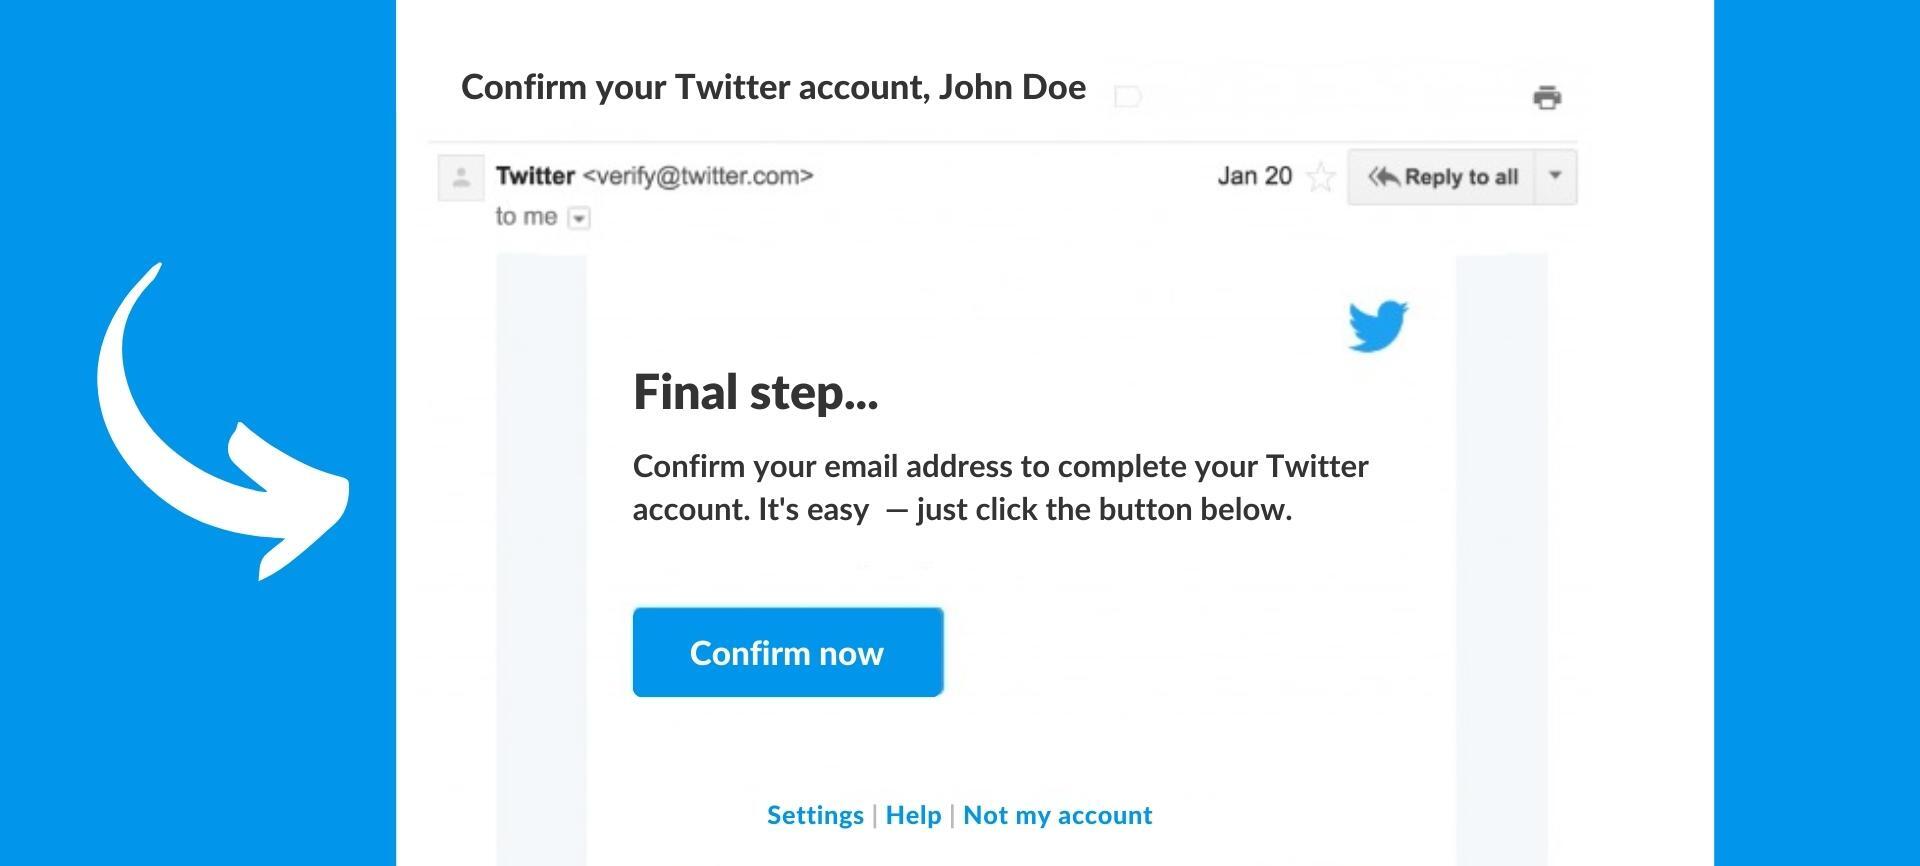 Become Twitter Verified - Confirm Your Contact Details: